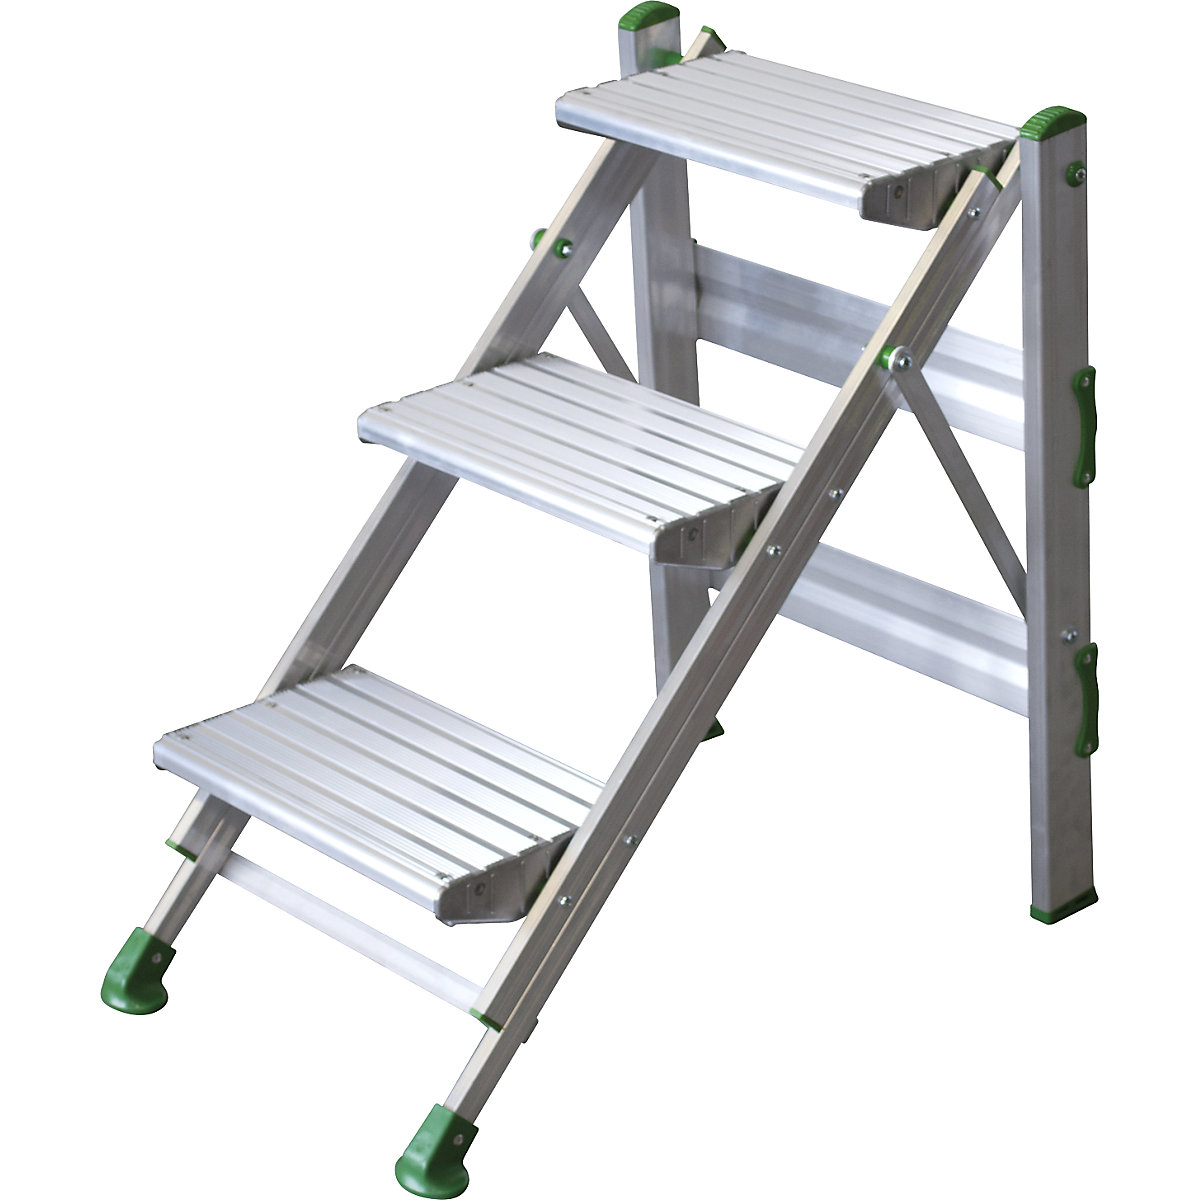 Folding steps made of aluminium, without safety rail, 3 steps-2